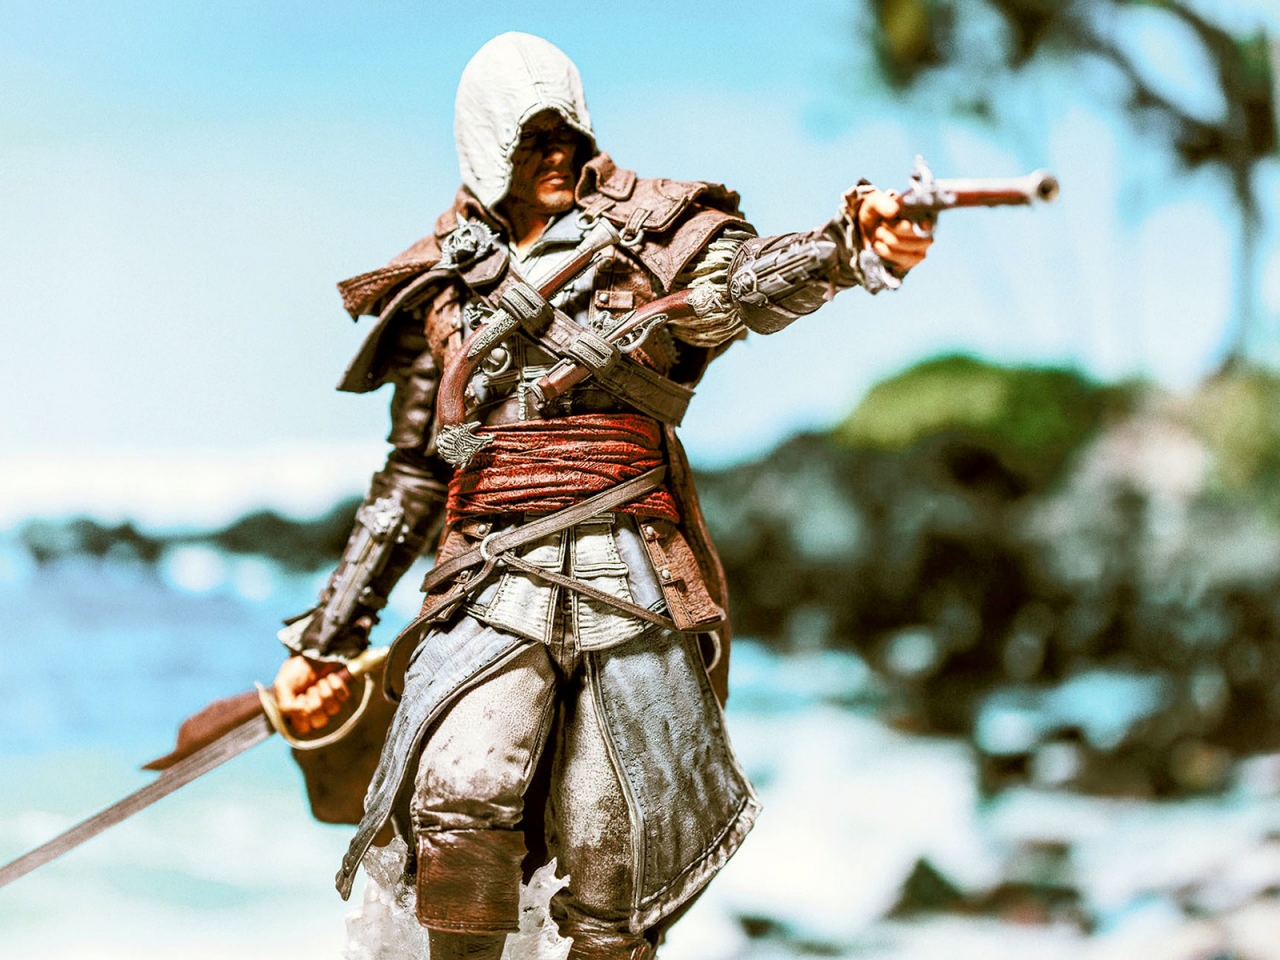 Assassin Creed Black Flag Character for 1280 x 960 resolution